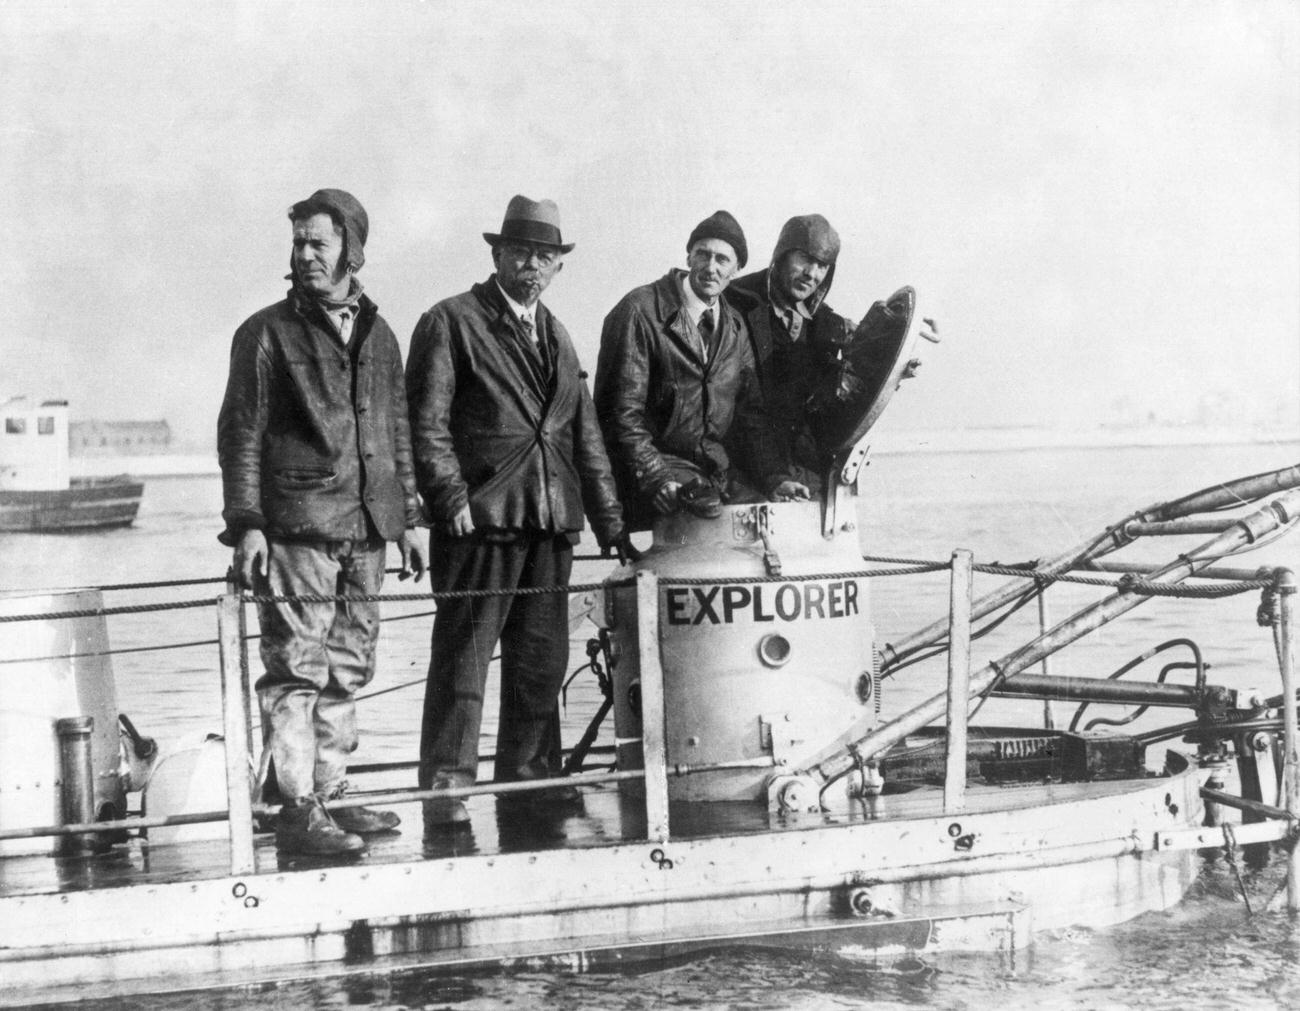 American Navy diver Frank Crilley, Simon Lake, William Beebe, and Jack Dunbar on deck of Lake's Explorer submarine, Long Island Sound, 1932.